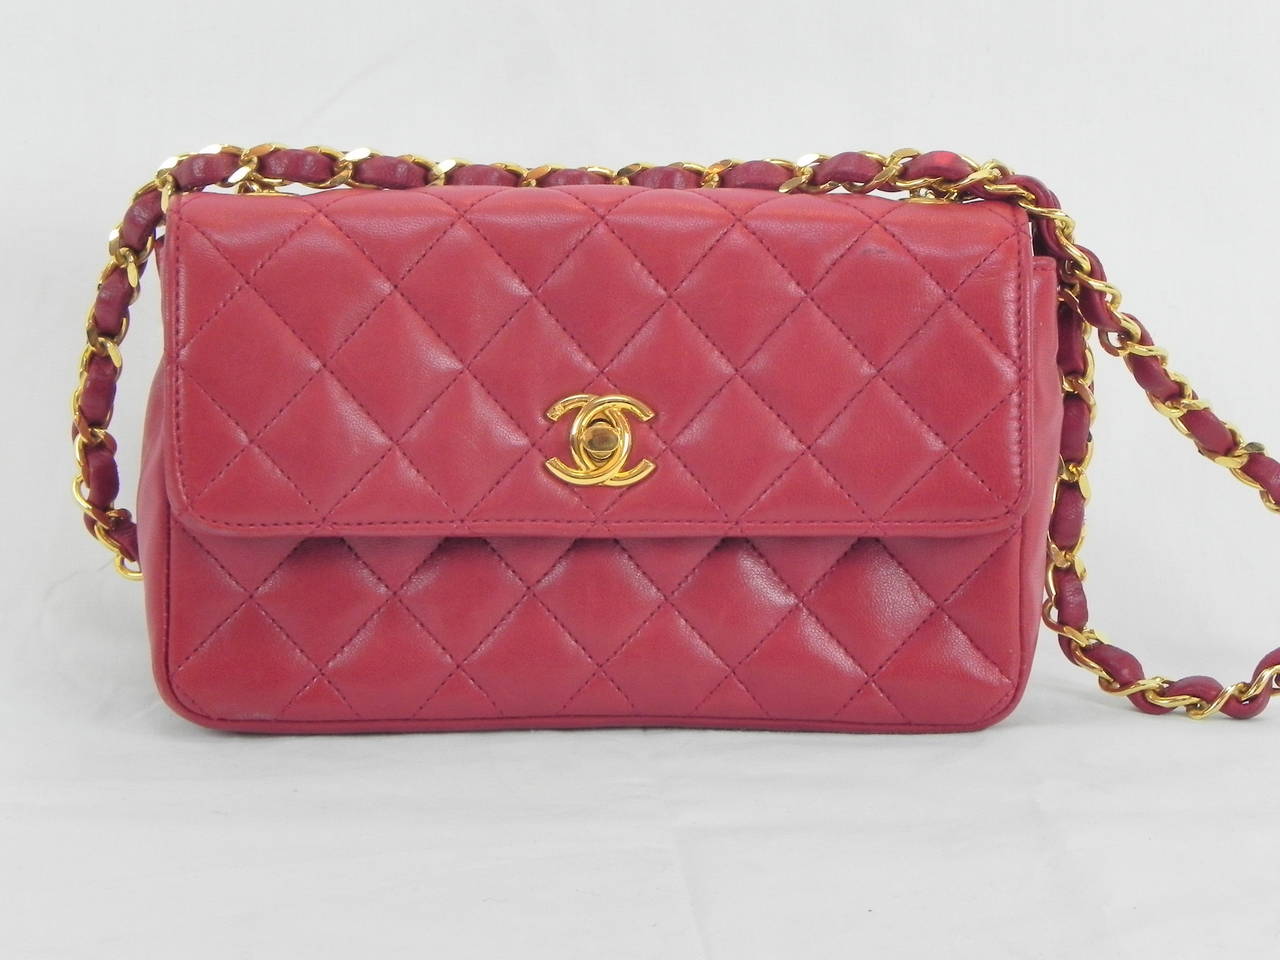 Classic Chanel Red Lamb skin 19 cm ,1980,s .

Very Good Condition with Chanel guarantee card .

Great Party bag and hard to find in Red !

Dimensions are 7 3/4 by 2 3/4 by 5 3/34 Inches .

Dust Bag included